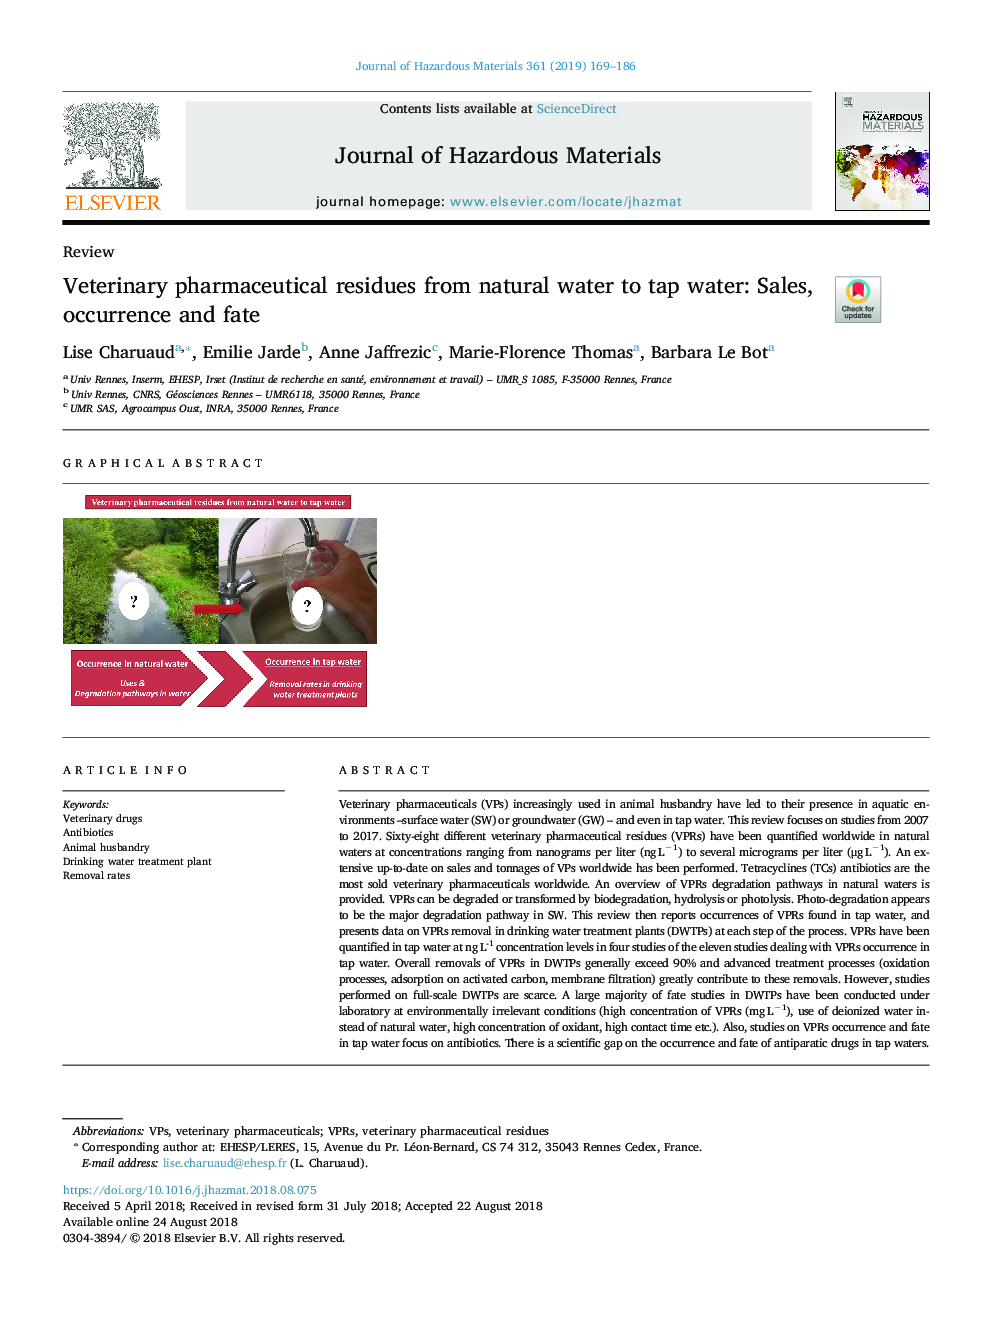 Veterinary pharmaceutical residues from natural water to tap water: Sales, occurrence and fate